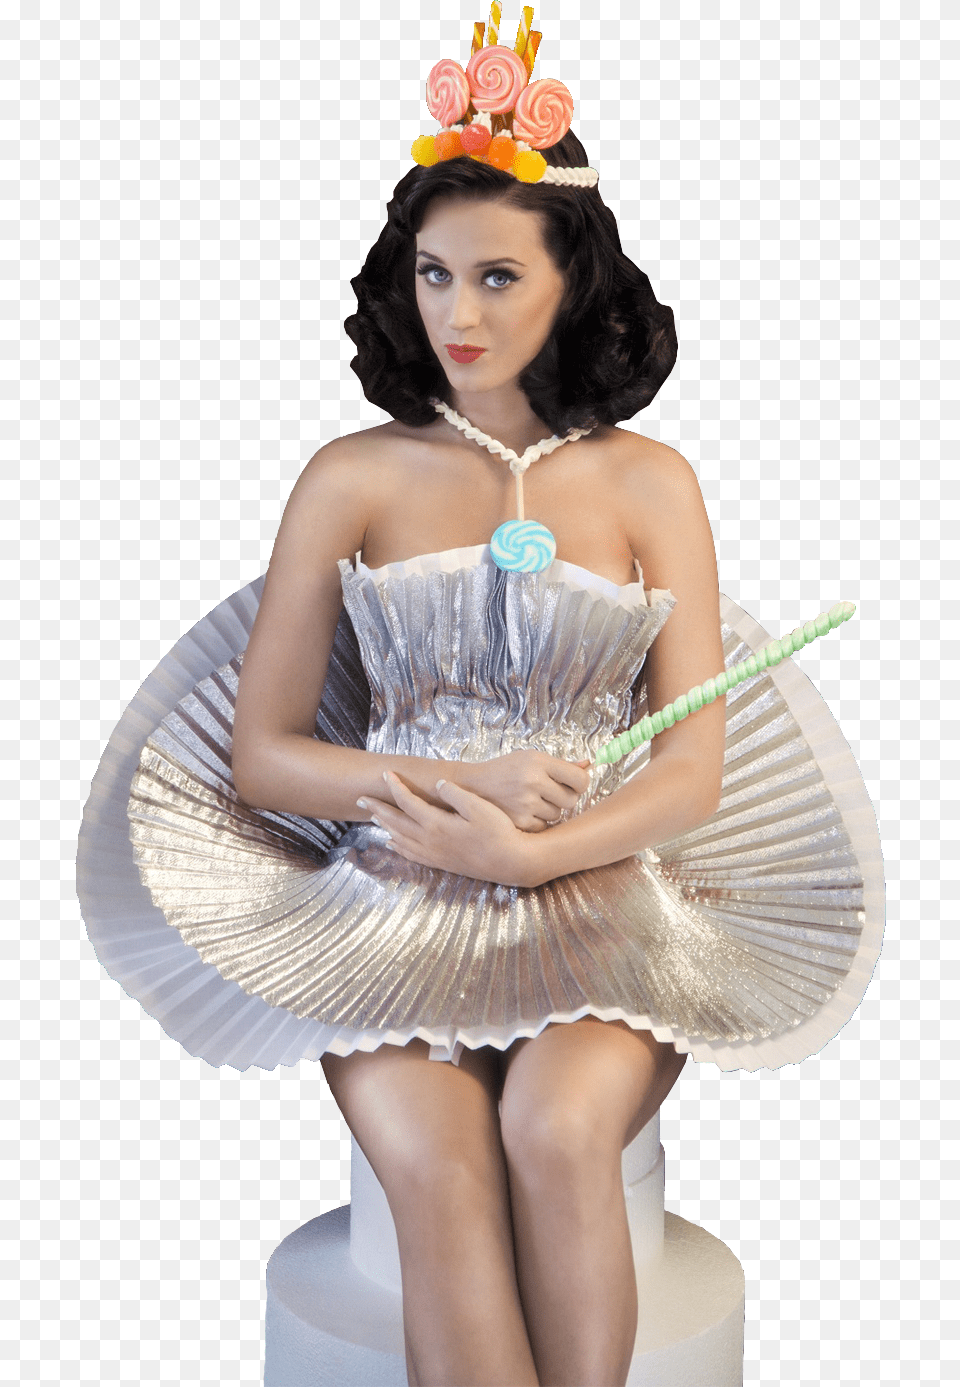 Katy Perry Teenage Dream Wallpapers Katy Perry Teenage Dream, Person, Clothing, Costume, Adult Png Image